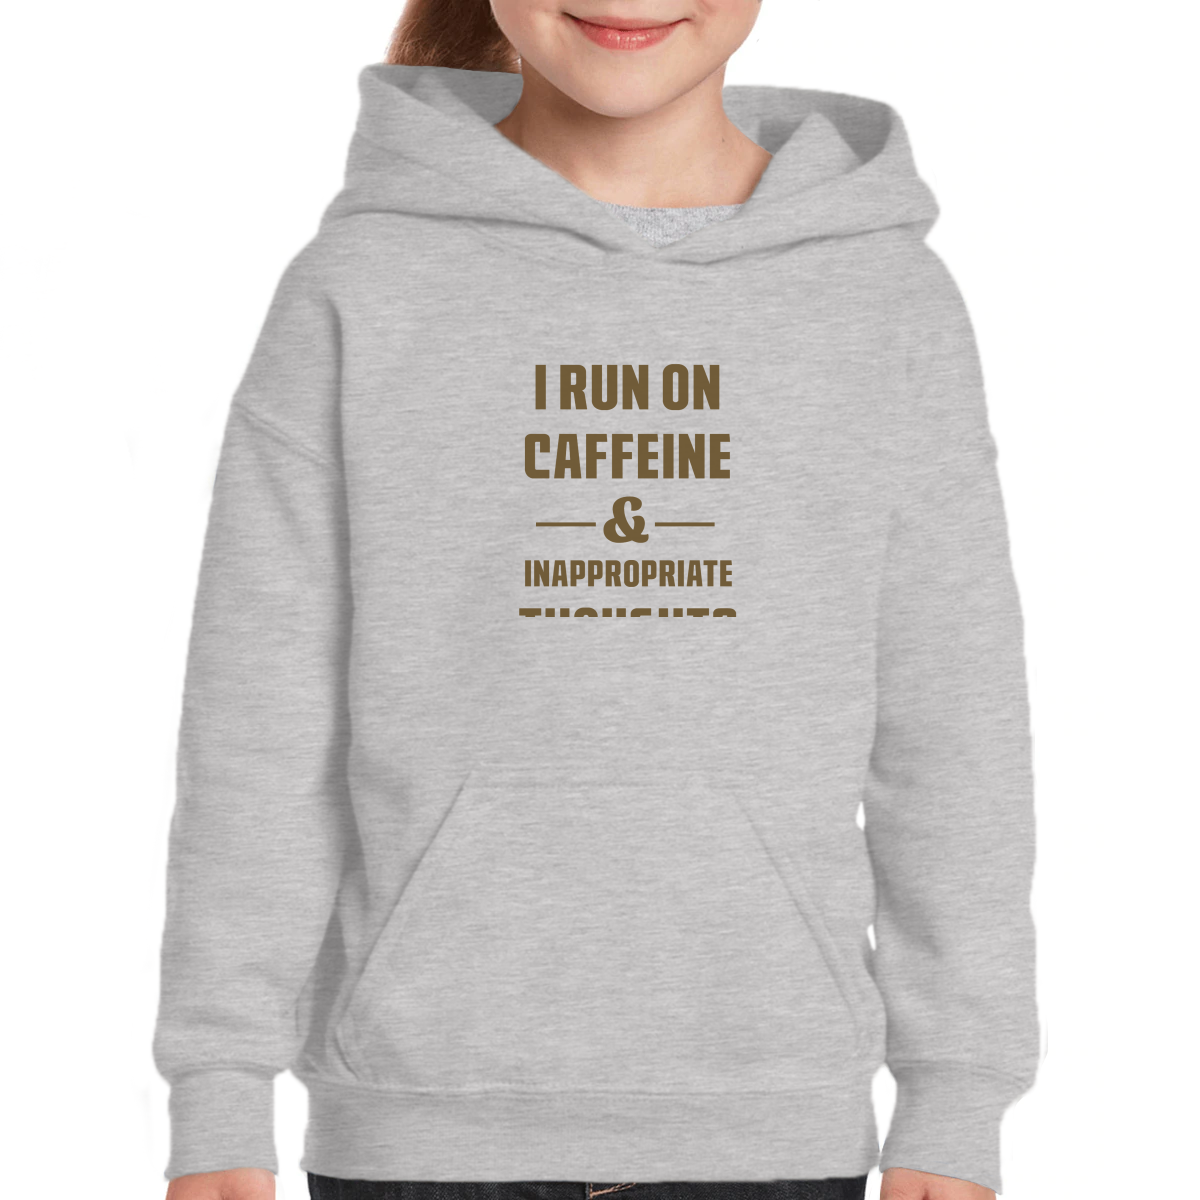 I Run On Caffeine and Inappropriate Thoughts Kids Hoodie | Gray